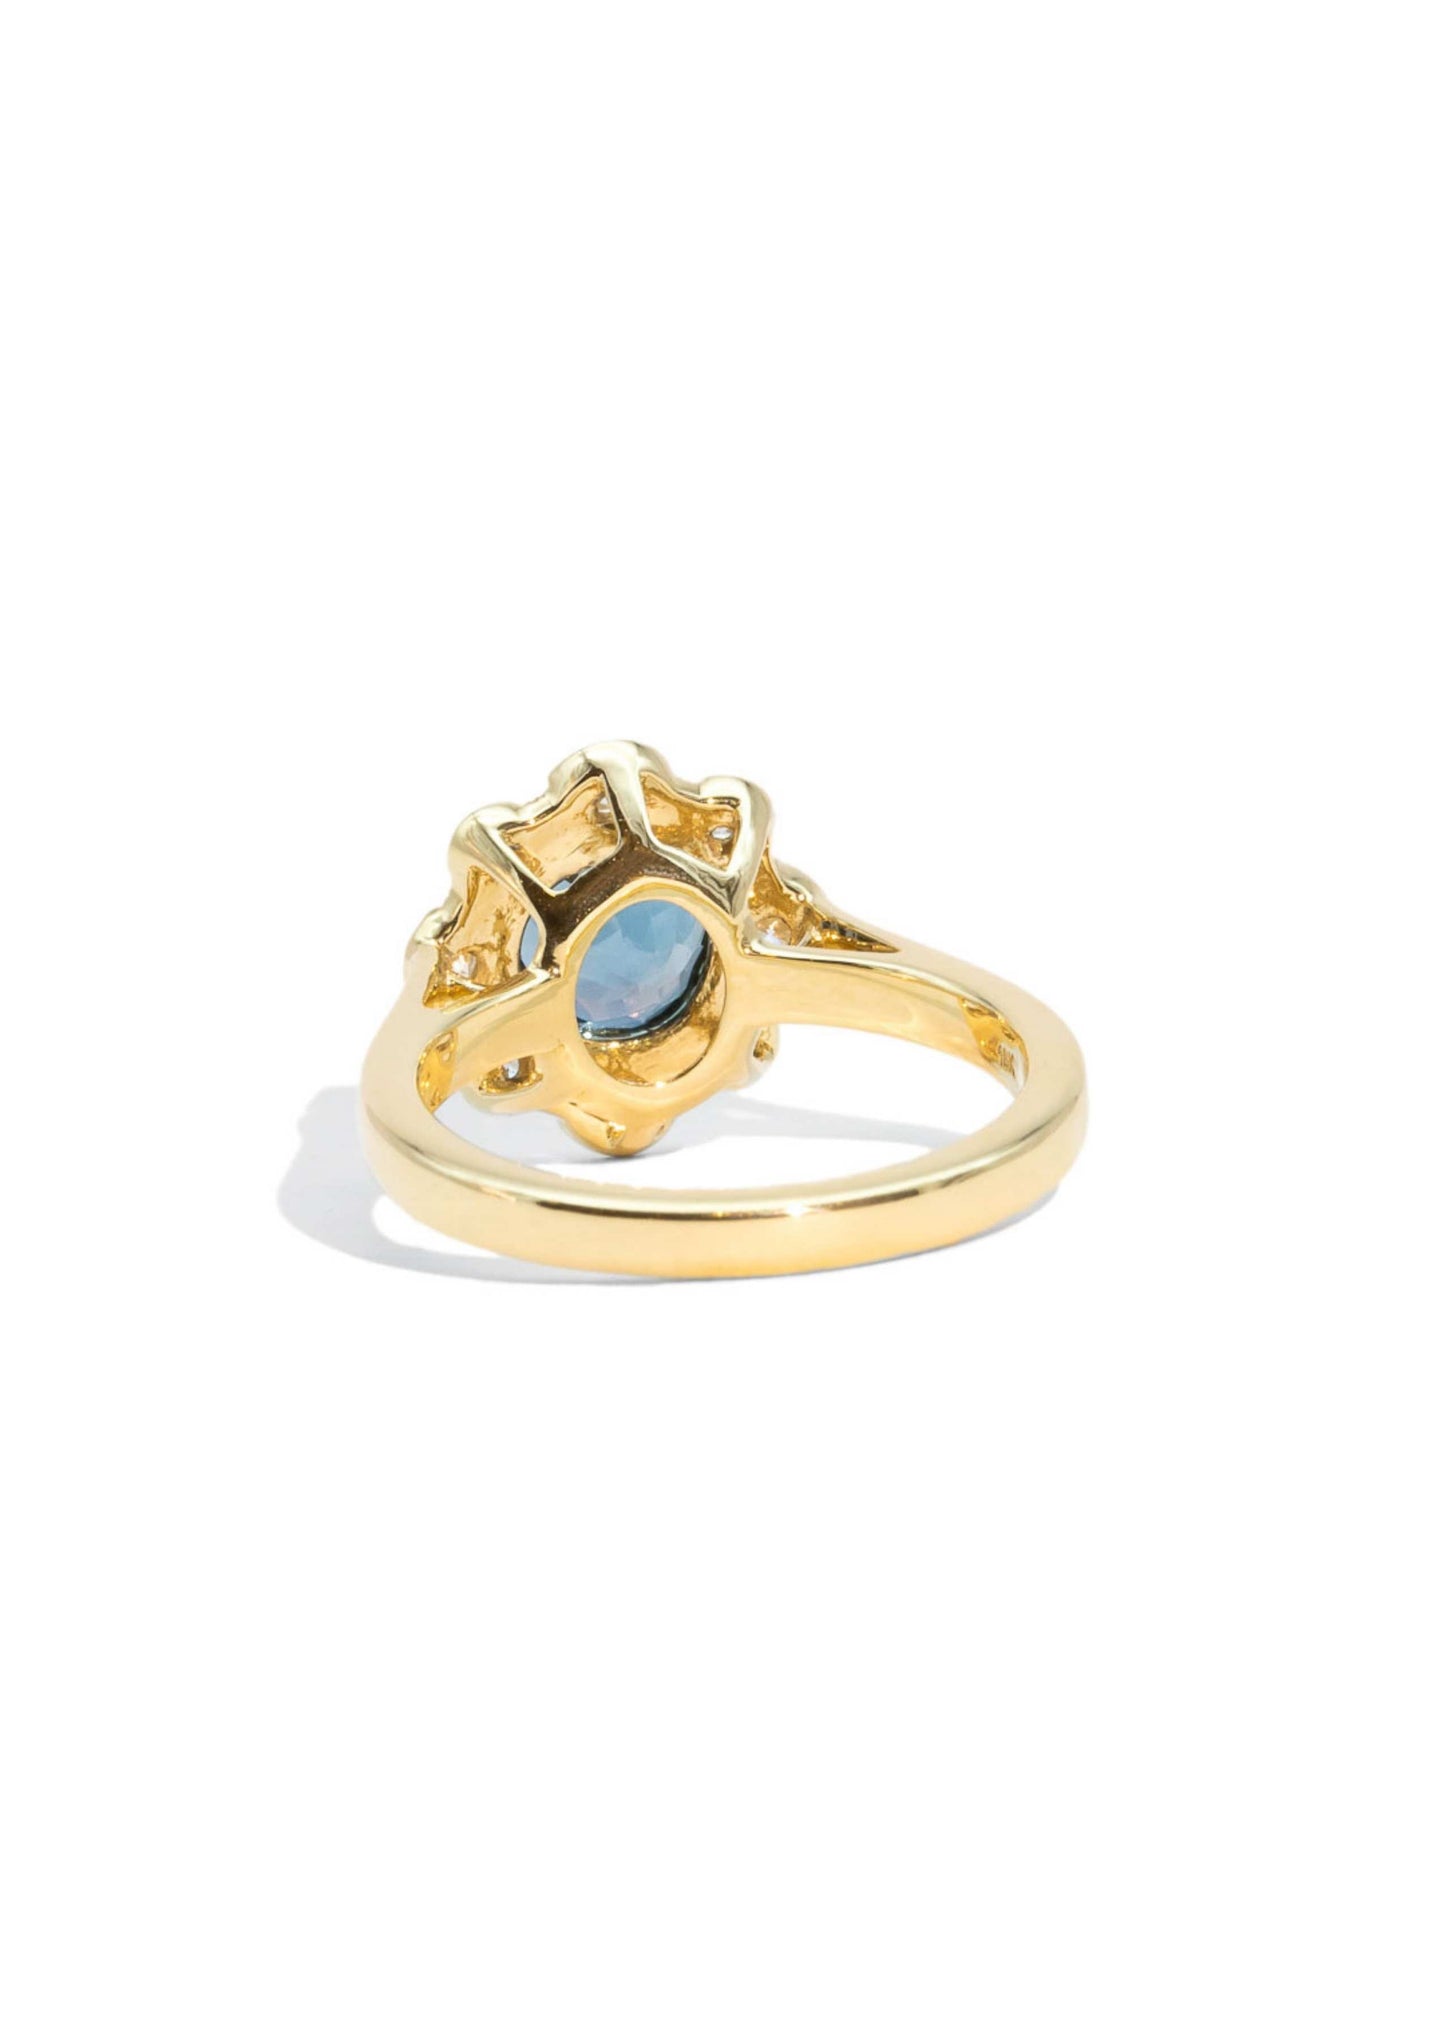 The Belle Ring with 1.14ct Aquamarine